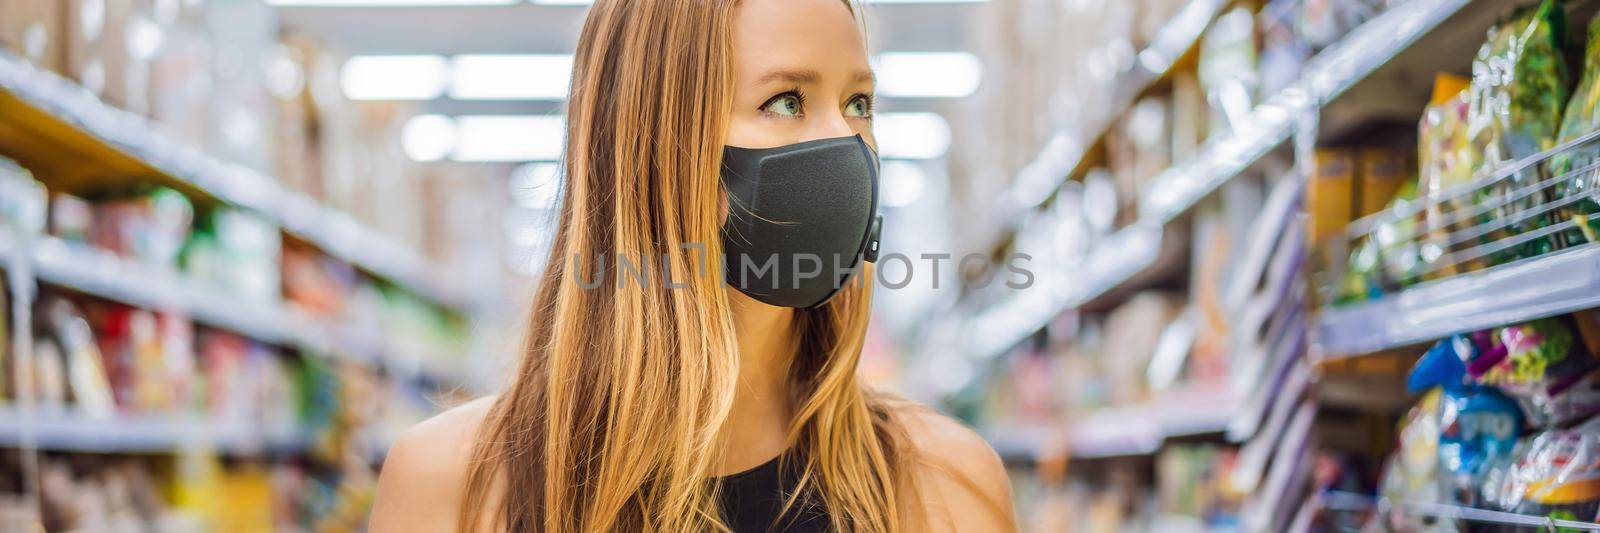 Alarmed female wears medical mask against coronavirus while grocery shopping in supermarket or store- health, safety and pandemic concept - young woman wearing protective mask and stockpiling food BANNER, LONG FORMAT by galitskaya